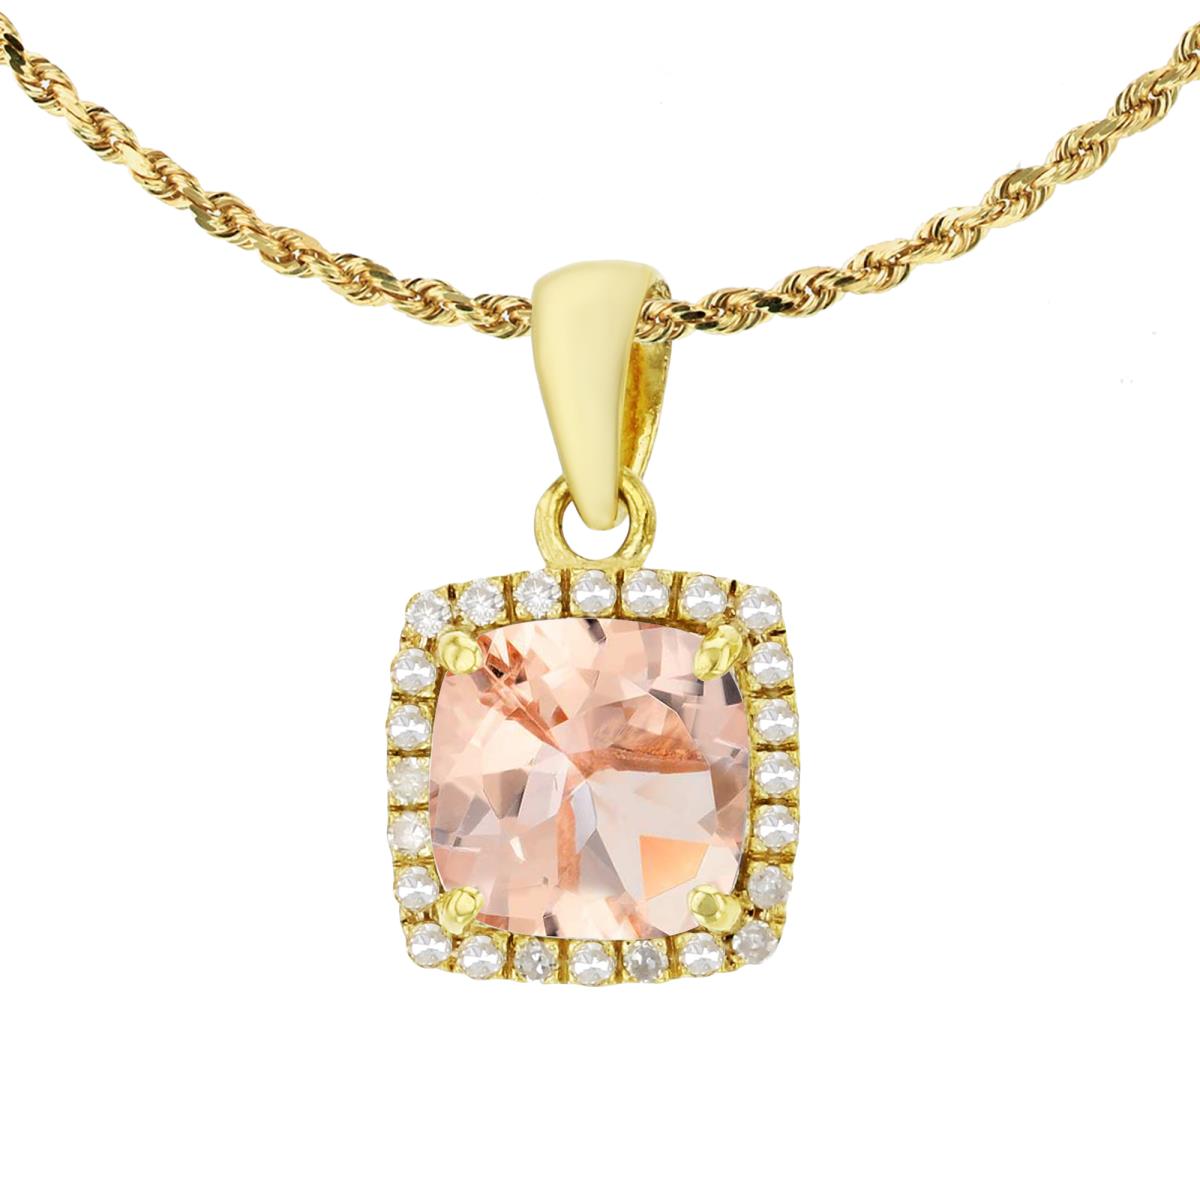 10K Yellow Gold 7mm Cushion Morganite & 0.12 CTTW Diamond Halo 18" Rope Chain Necklace